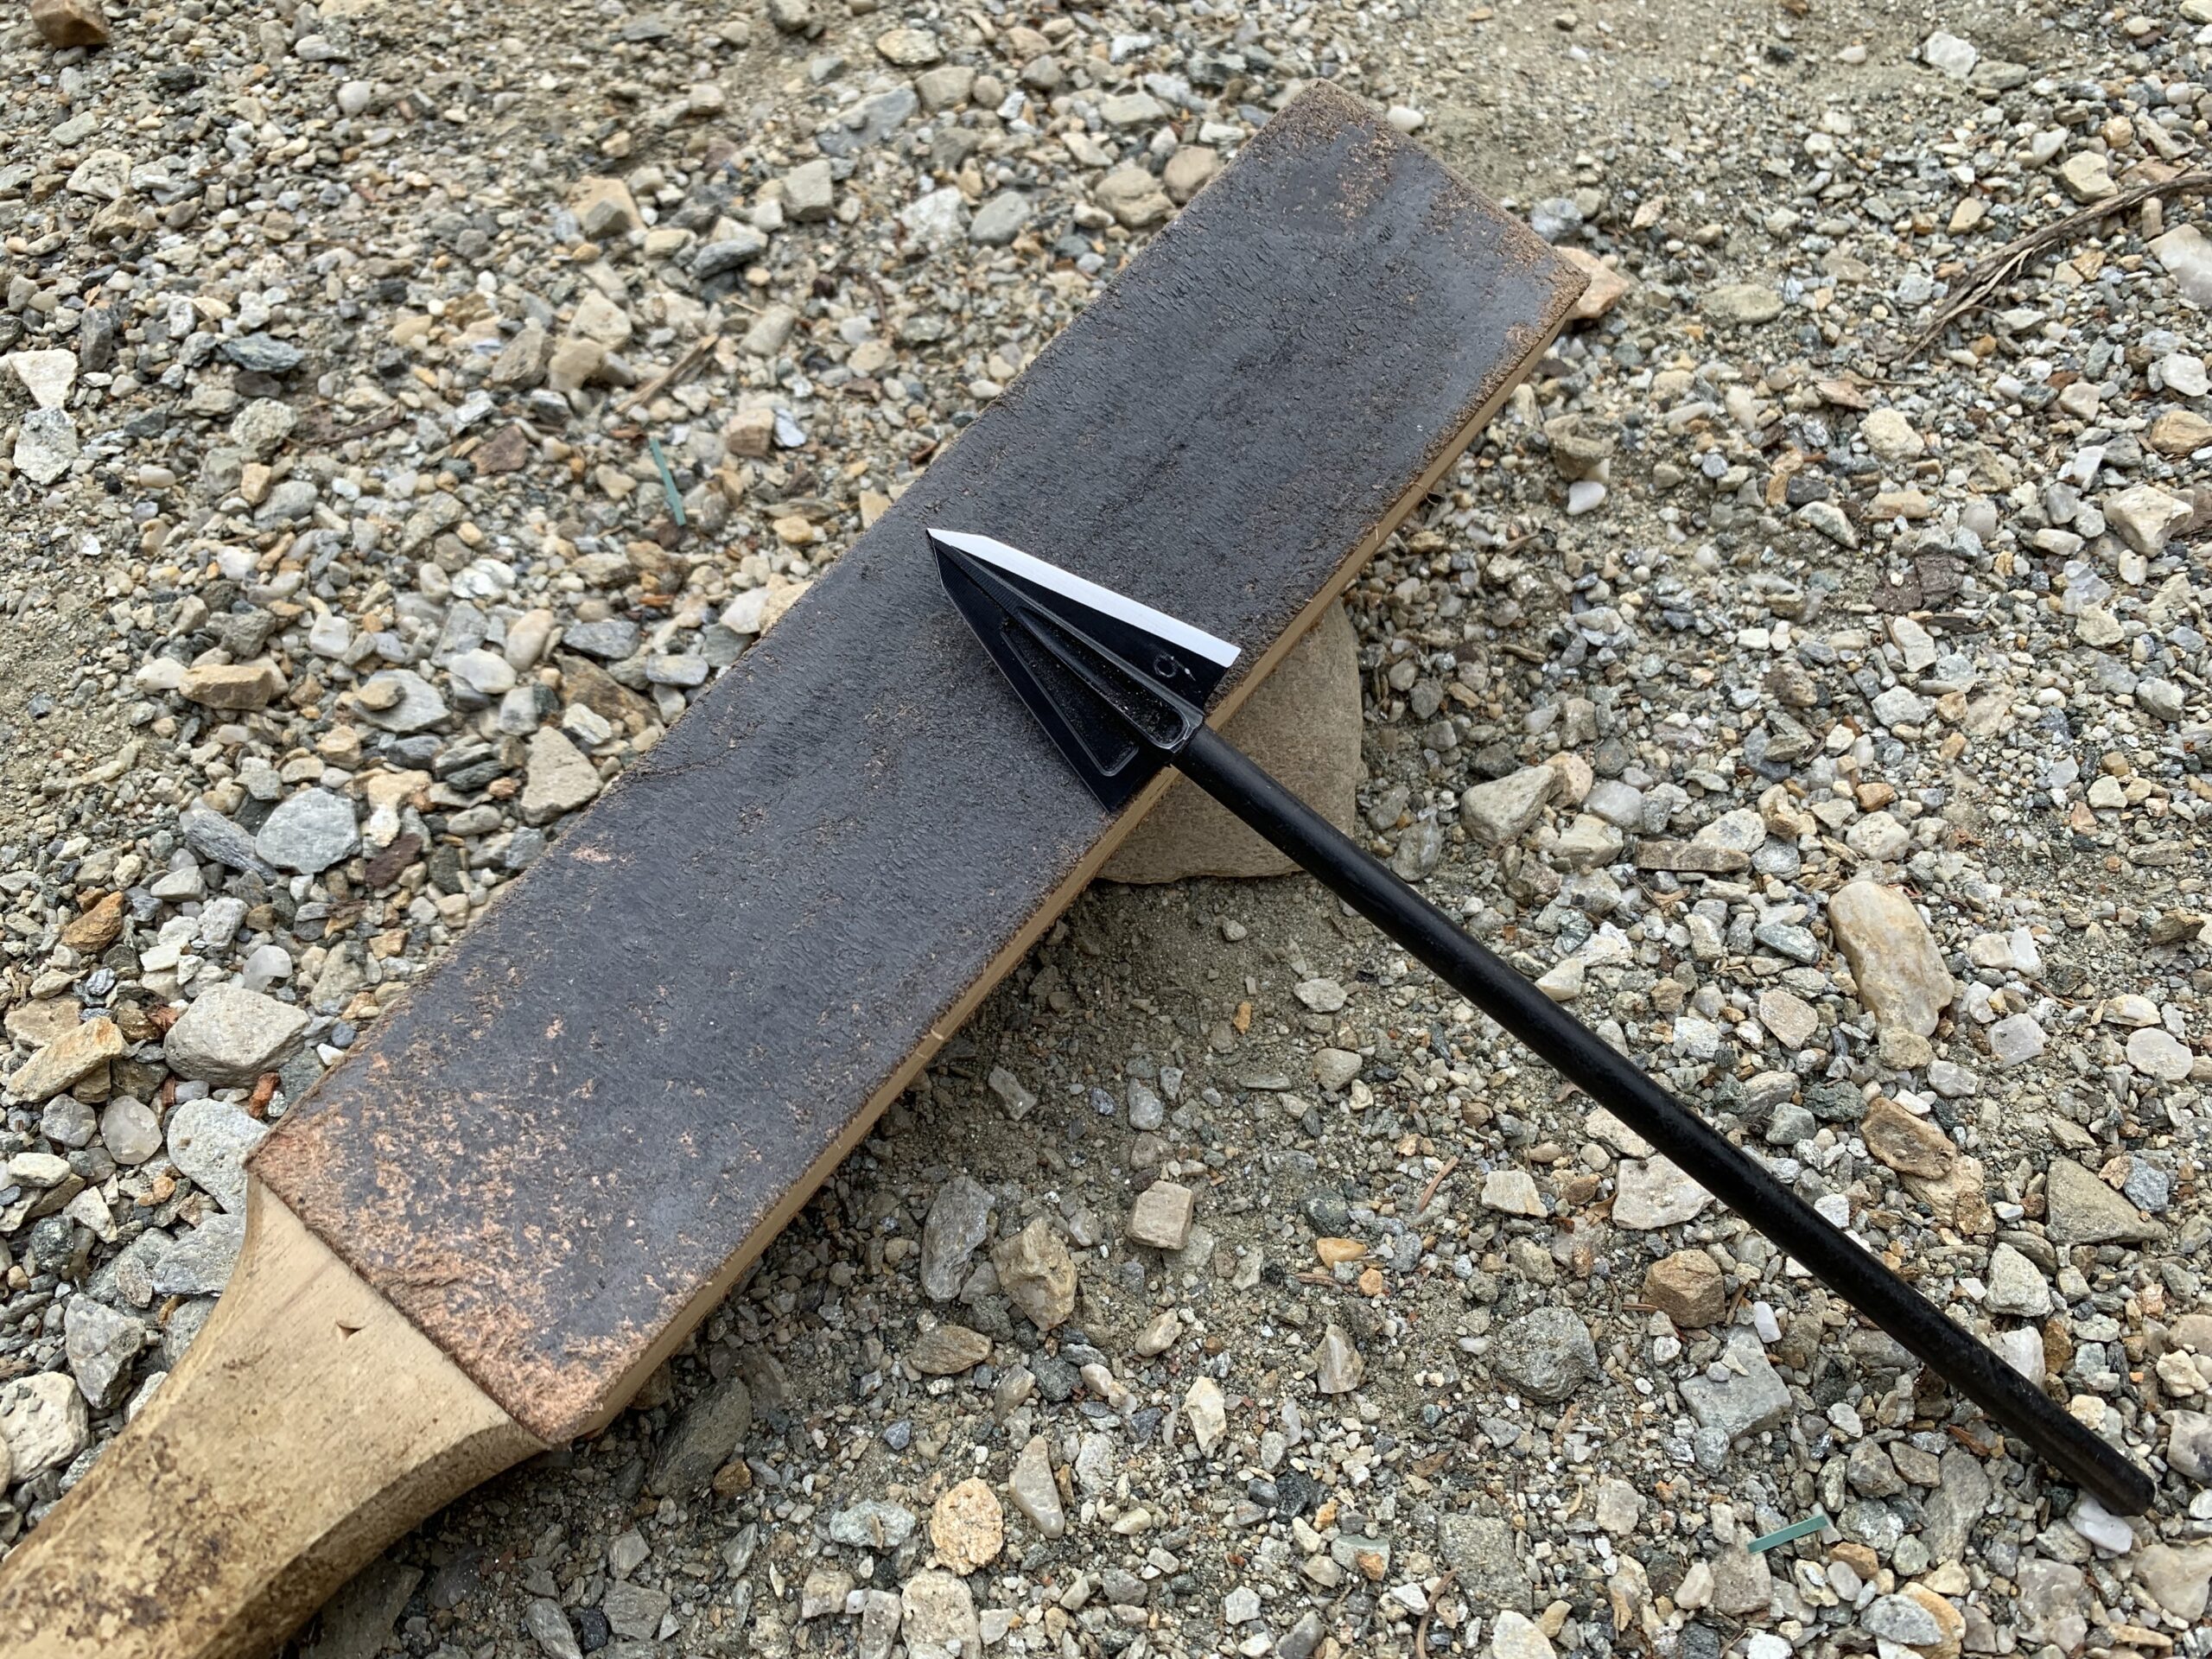 A strop makes sharpening single bevel broadheads easy.